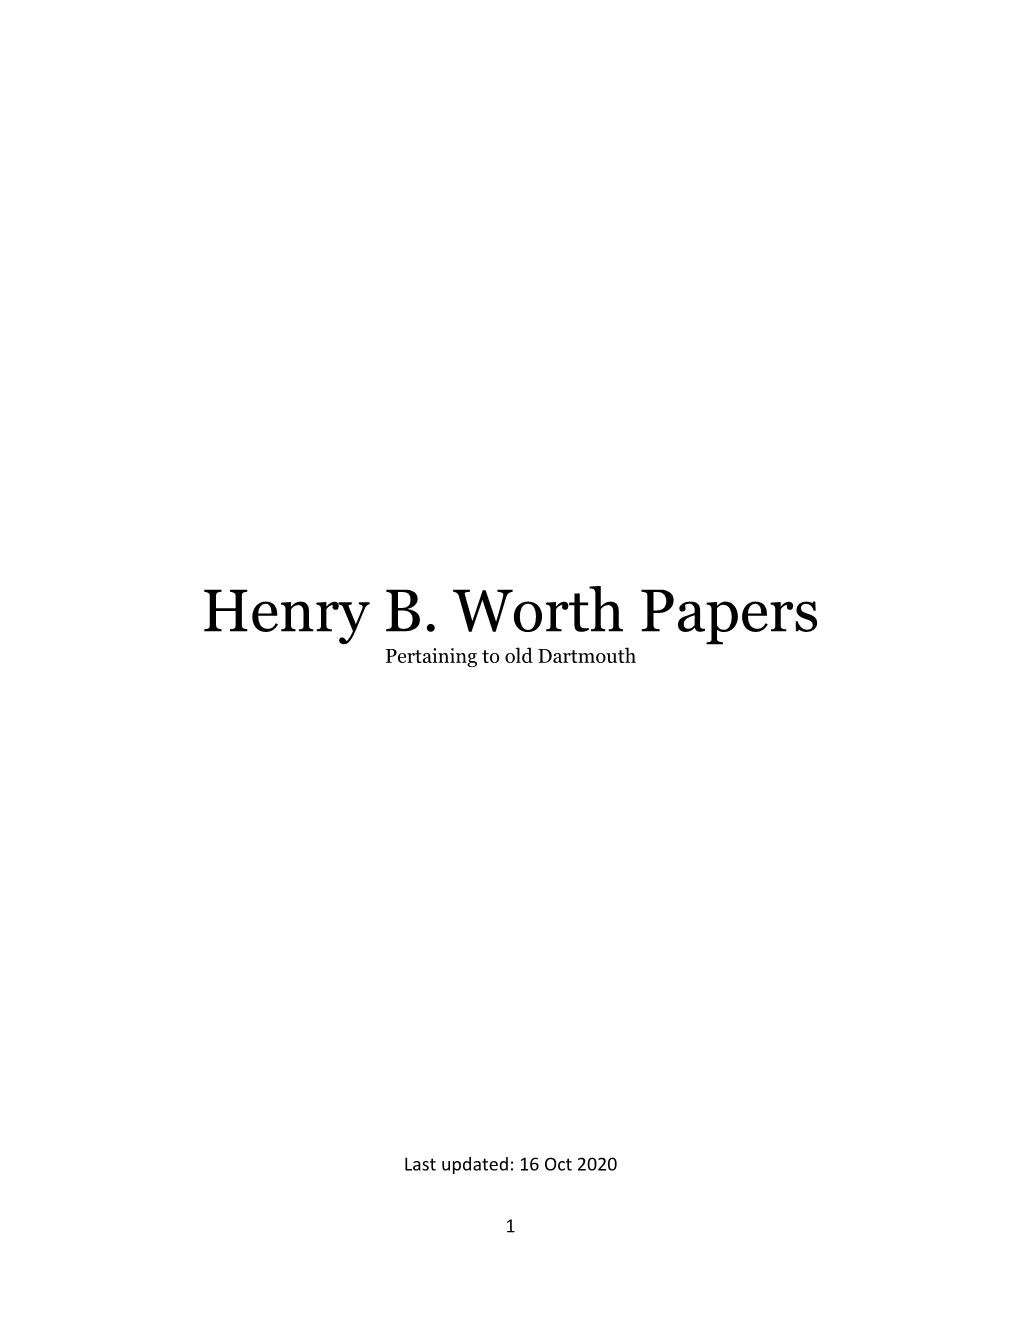 Henry B. Worth Papers Pertaining to Old Dartmouth